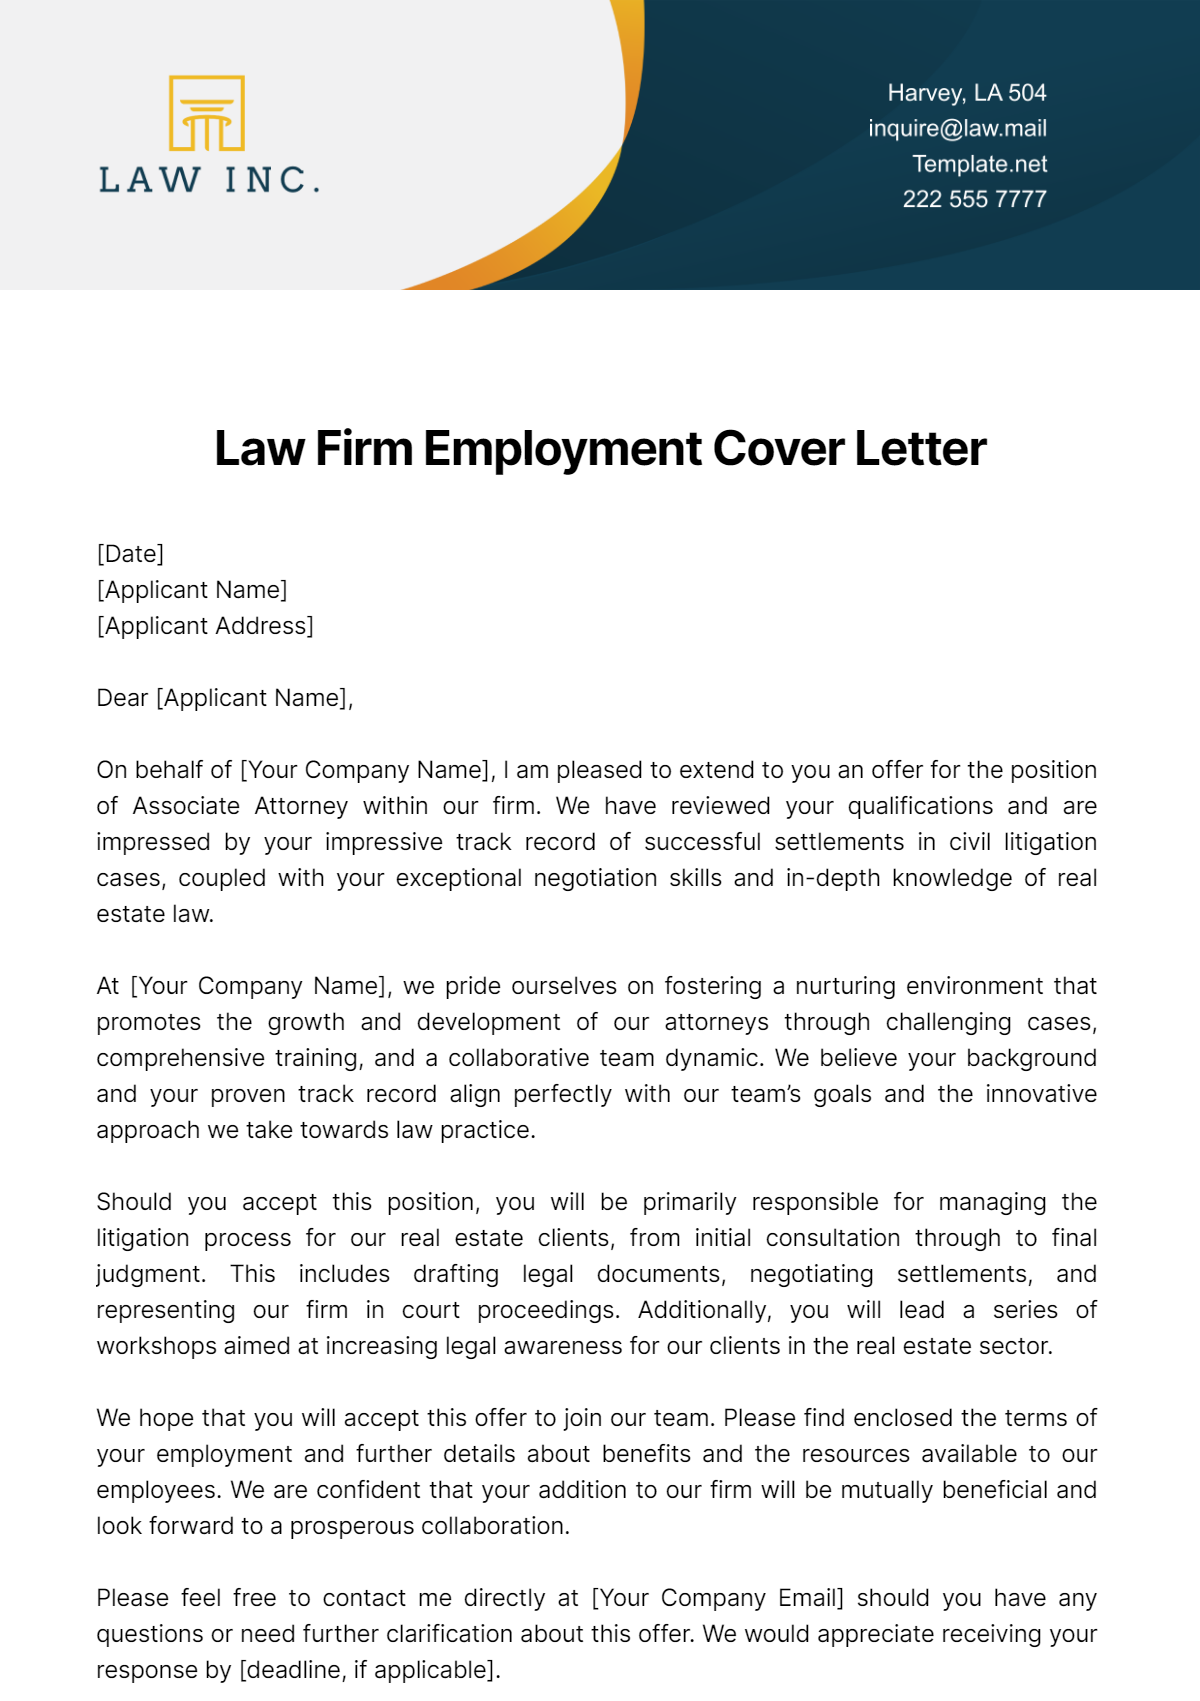 Law Firm Employment Cover Letter Template